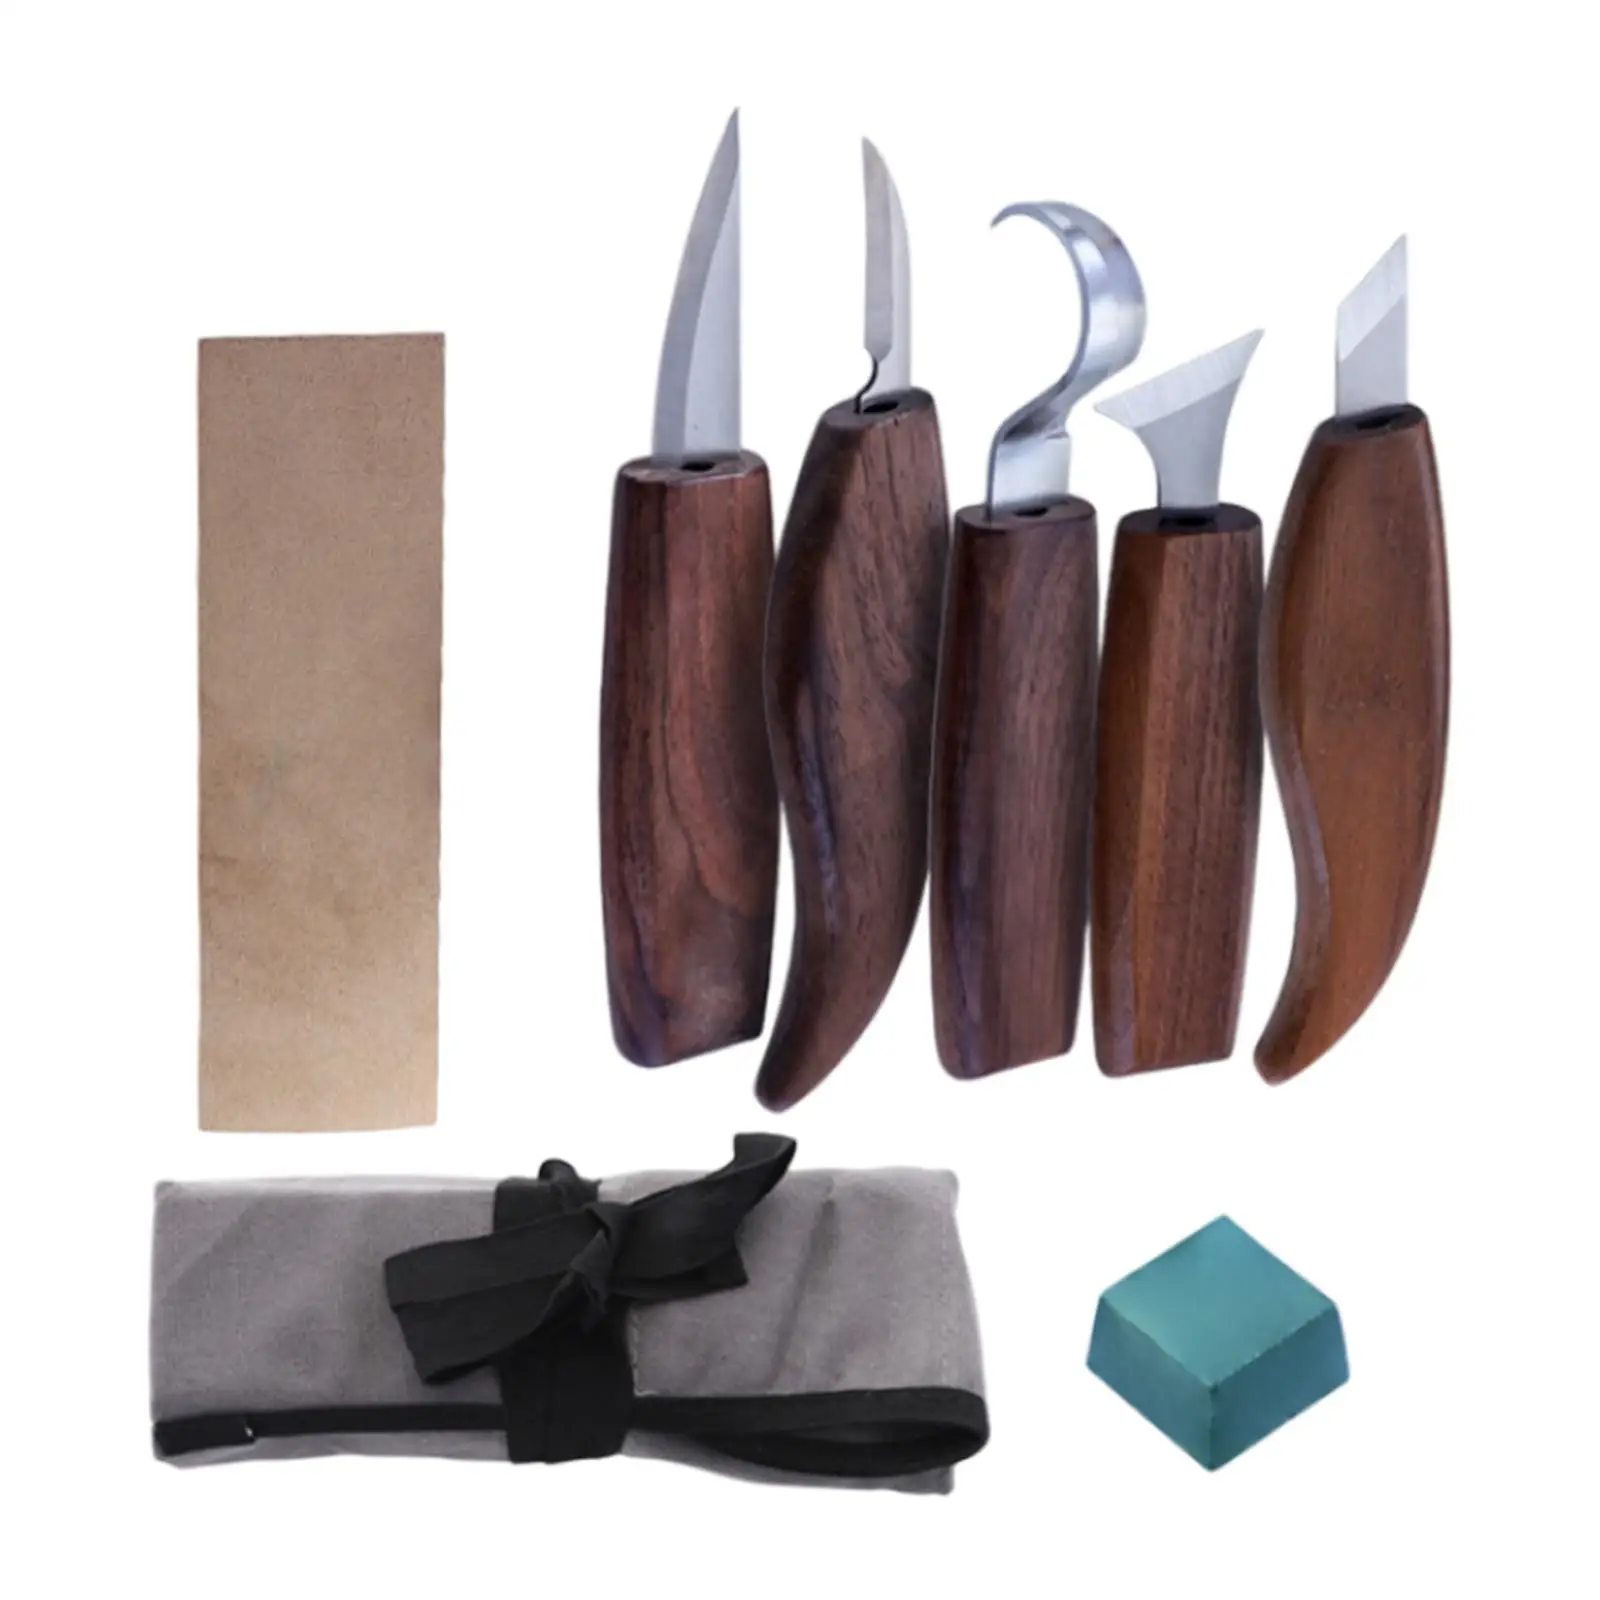 8 Pieces Woodworking DIY Carving Tool Durable Detailed Caving Beginners Whittling Kits for Paper Carving Fathers Gifts